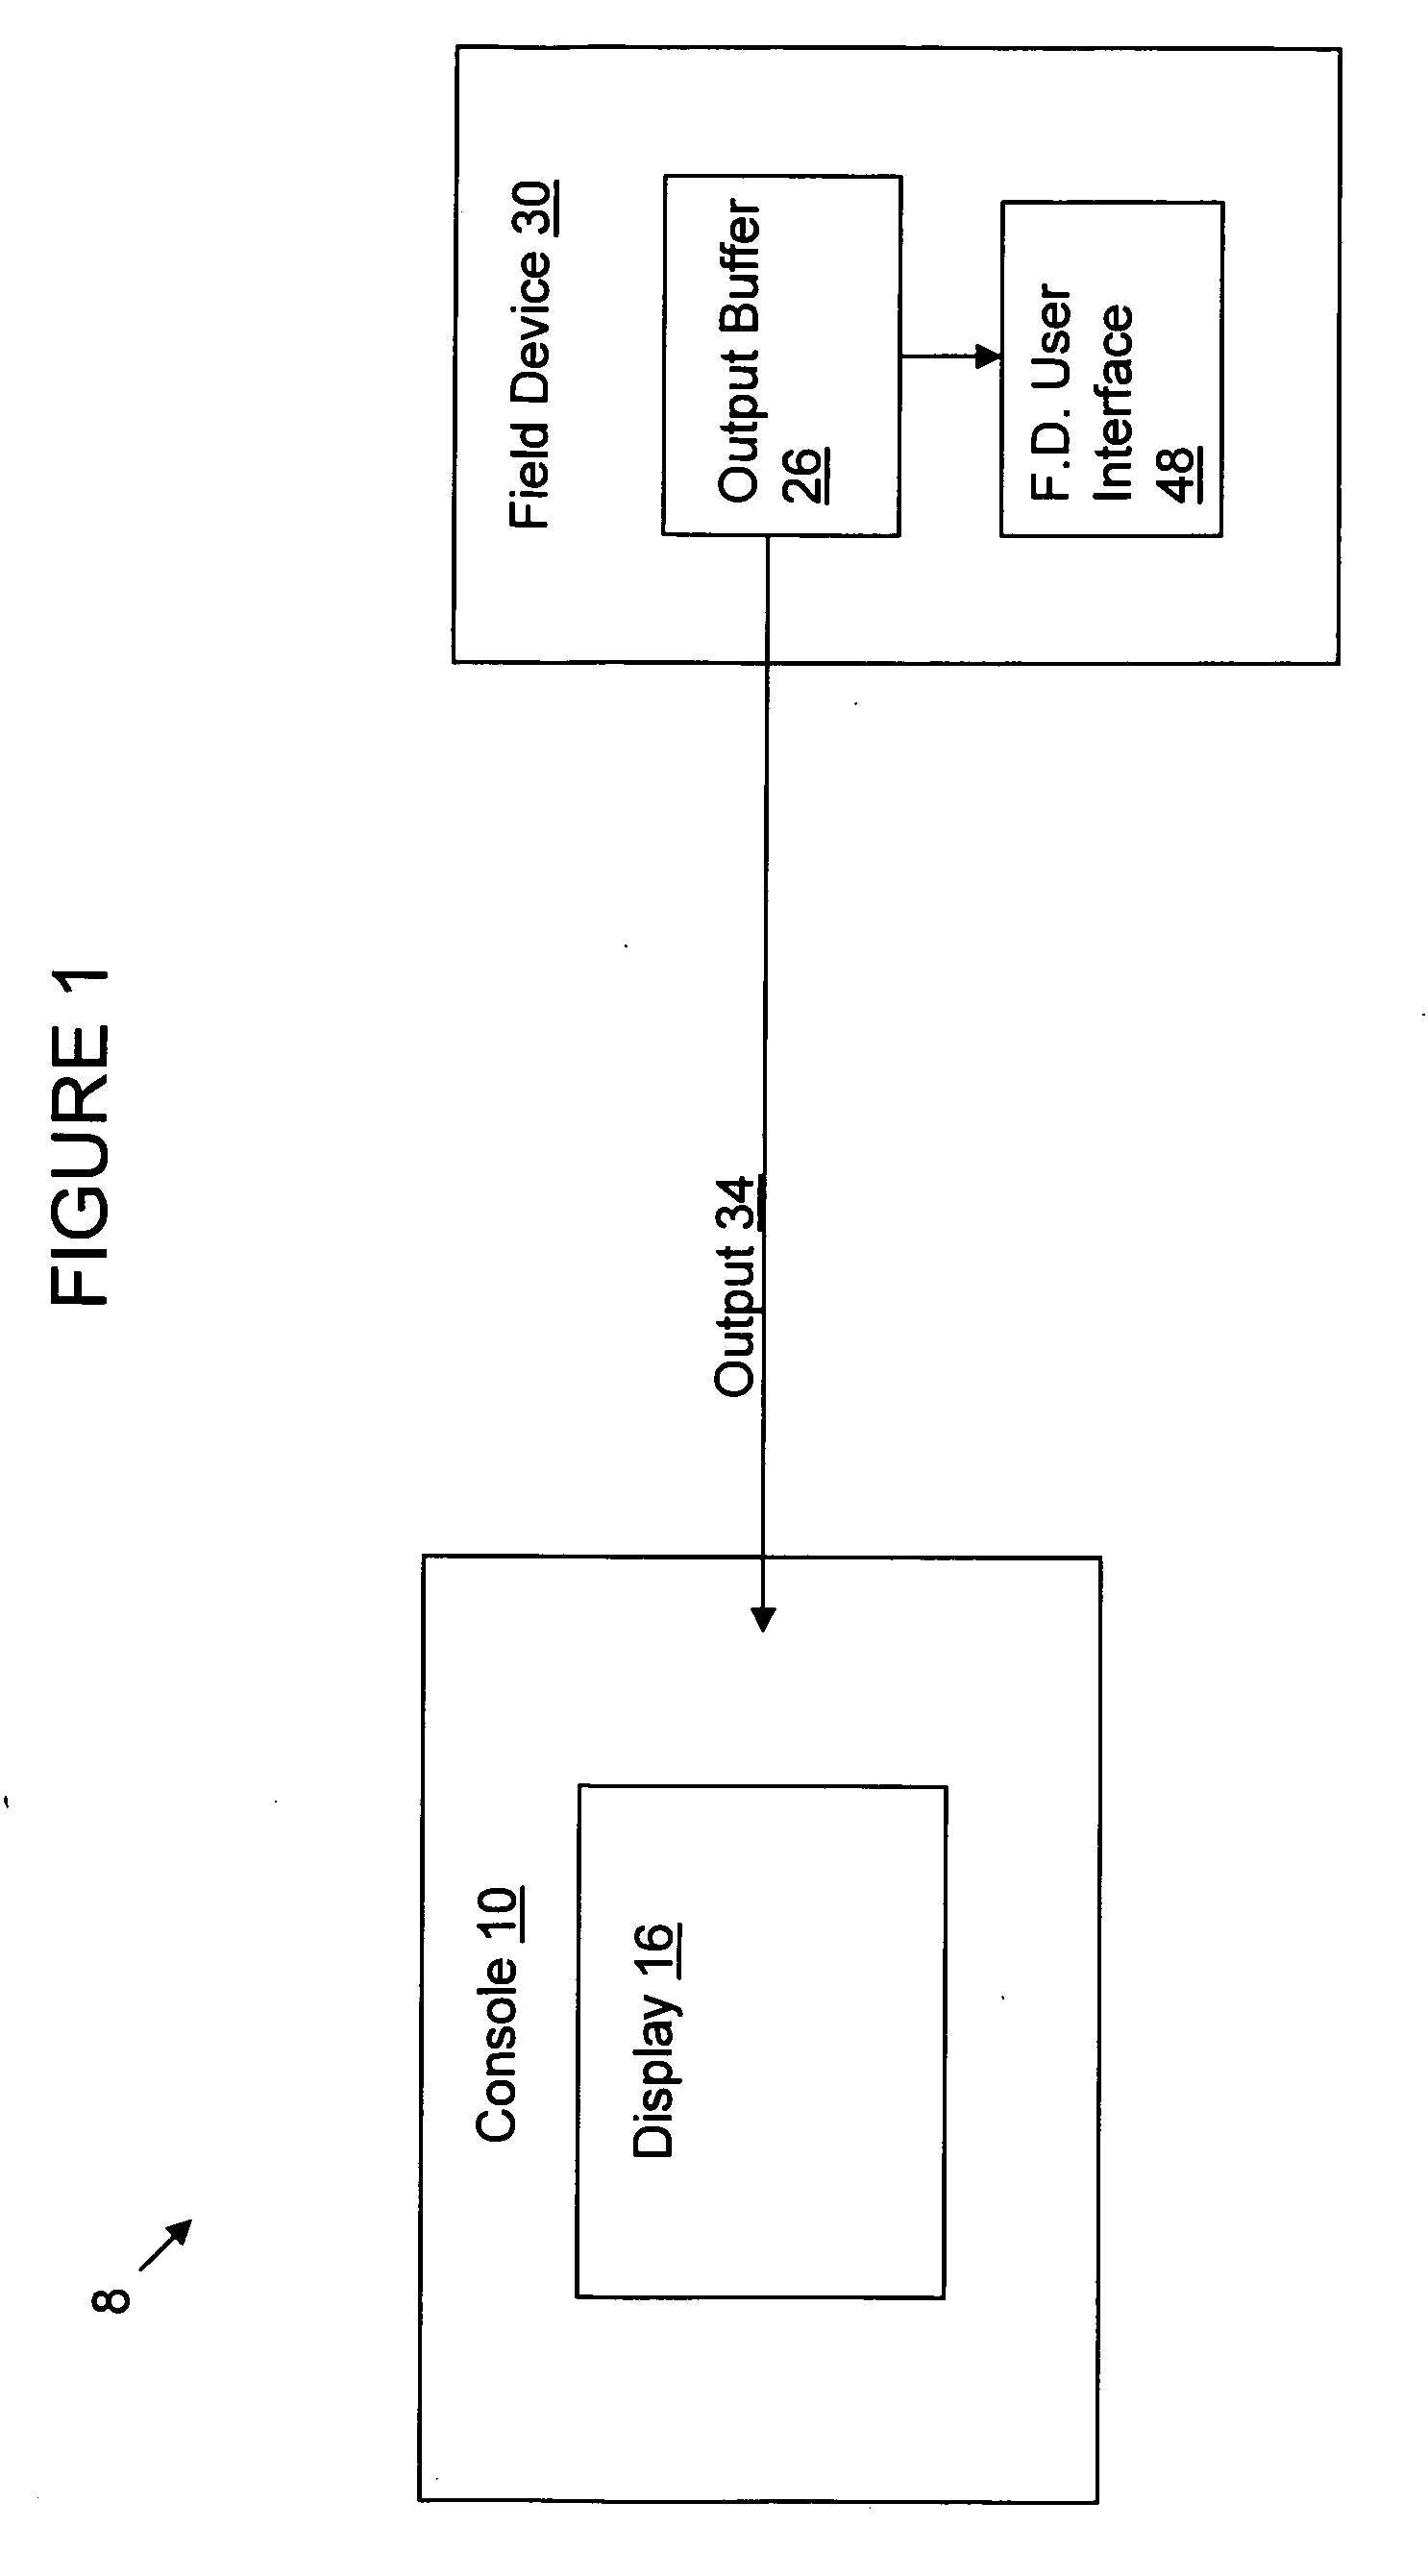 System and Method for Remote Monitoring and Control of Field Device